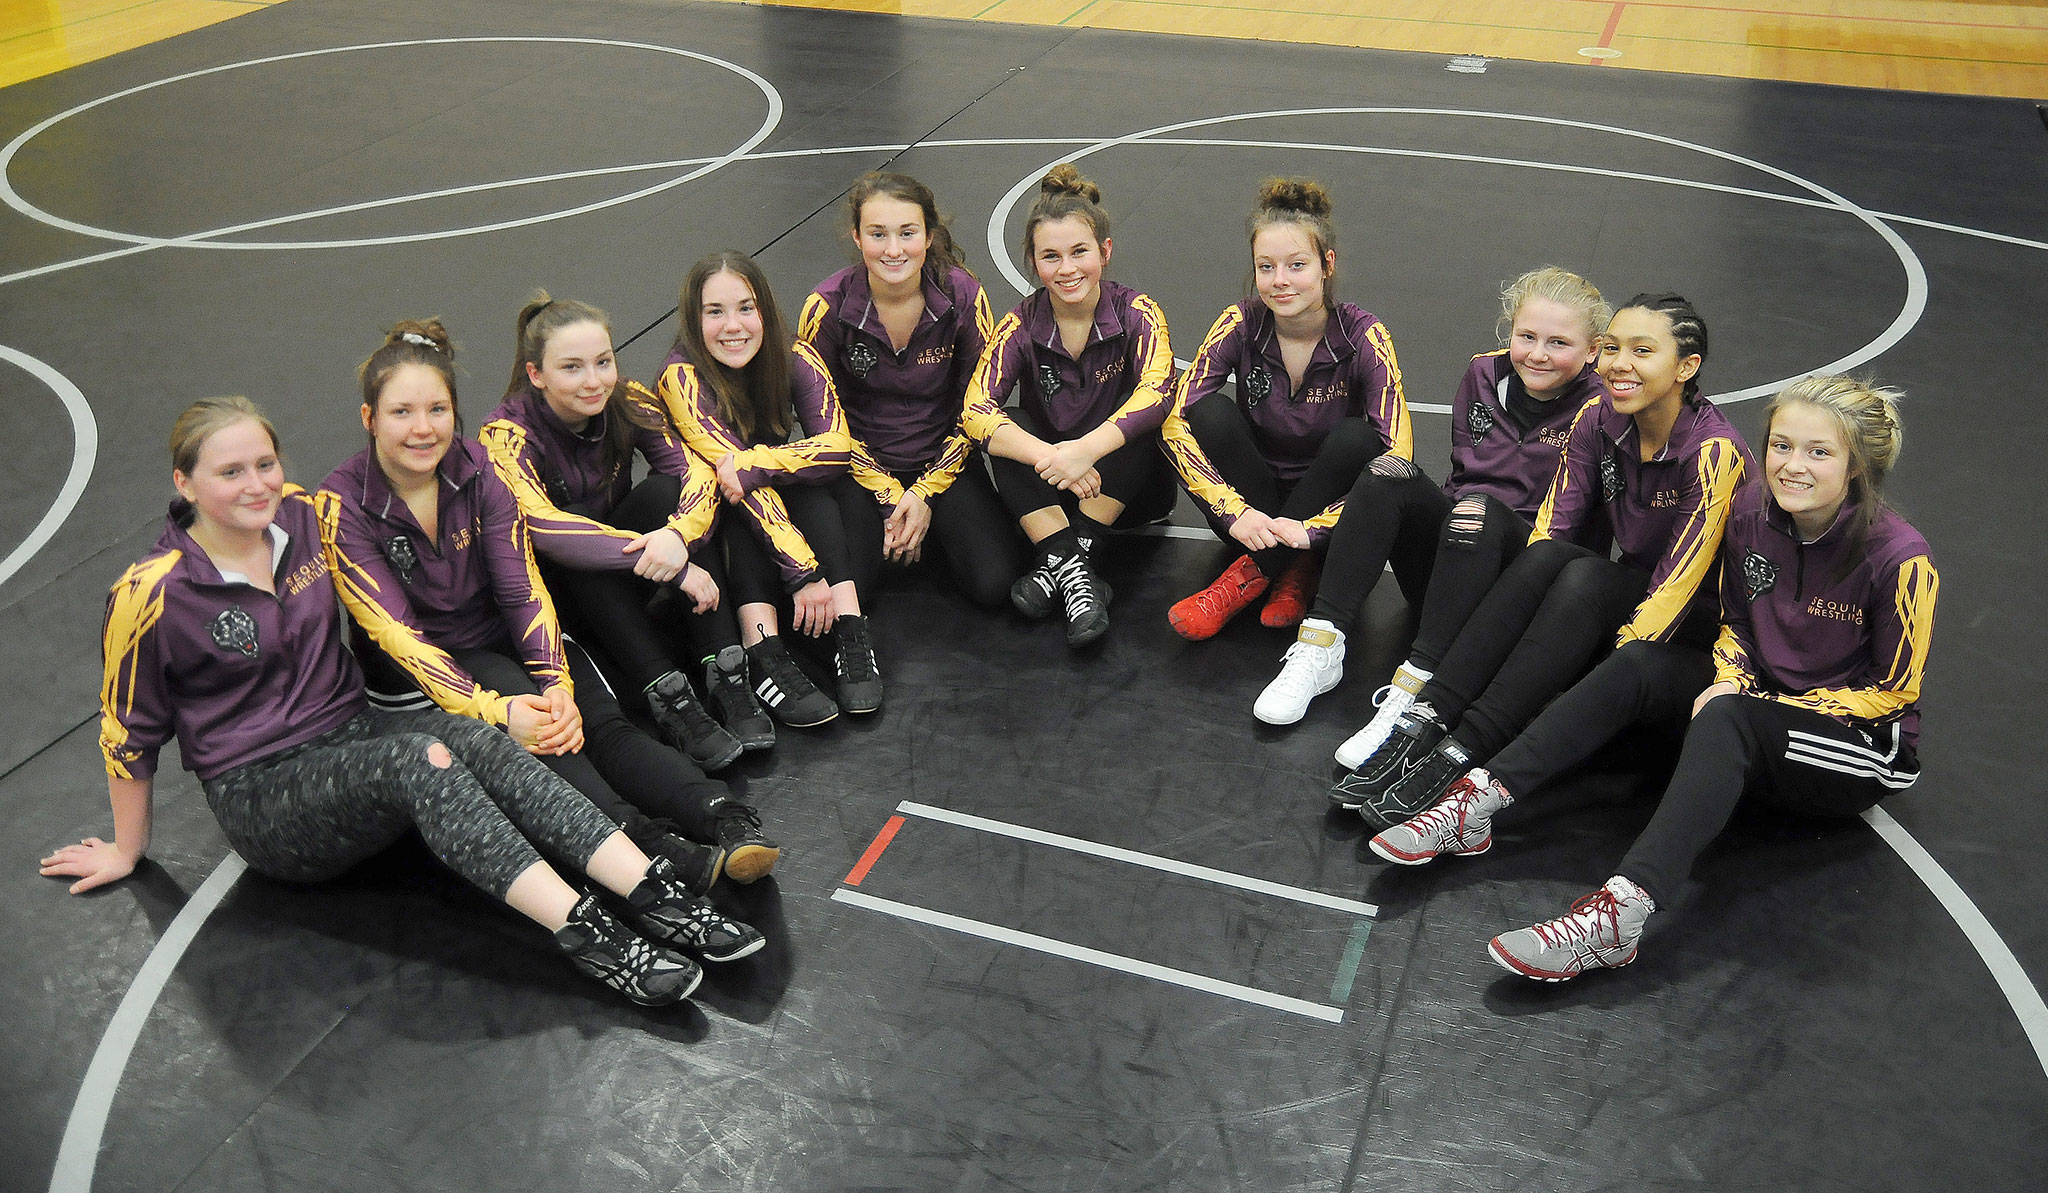 From left, Sequim High girls wrestling team members include, from left, Aleah Chen, Brooke Hodges, Skye Henning, Jordan Hegtvedt, Amara Sayer, Alexi Rampp-Taft, Kaydence Hilliard, Petra Bernsten, Chayil Briggs and Emily Dodson. Not pictured is Lilly Peterson. Sequim Gazette photo by Michael Dashiell